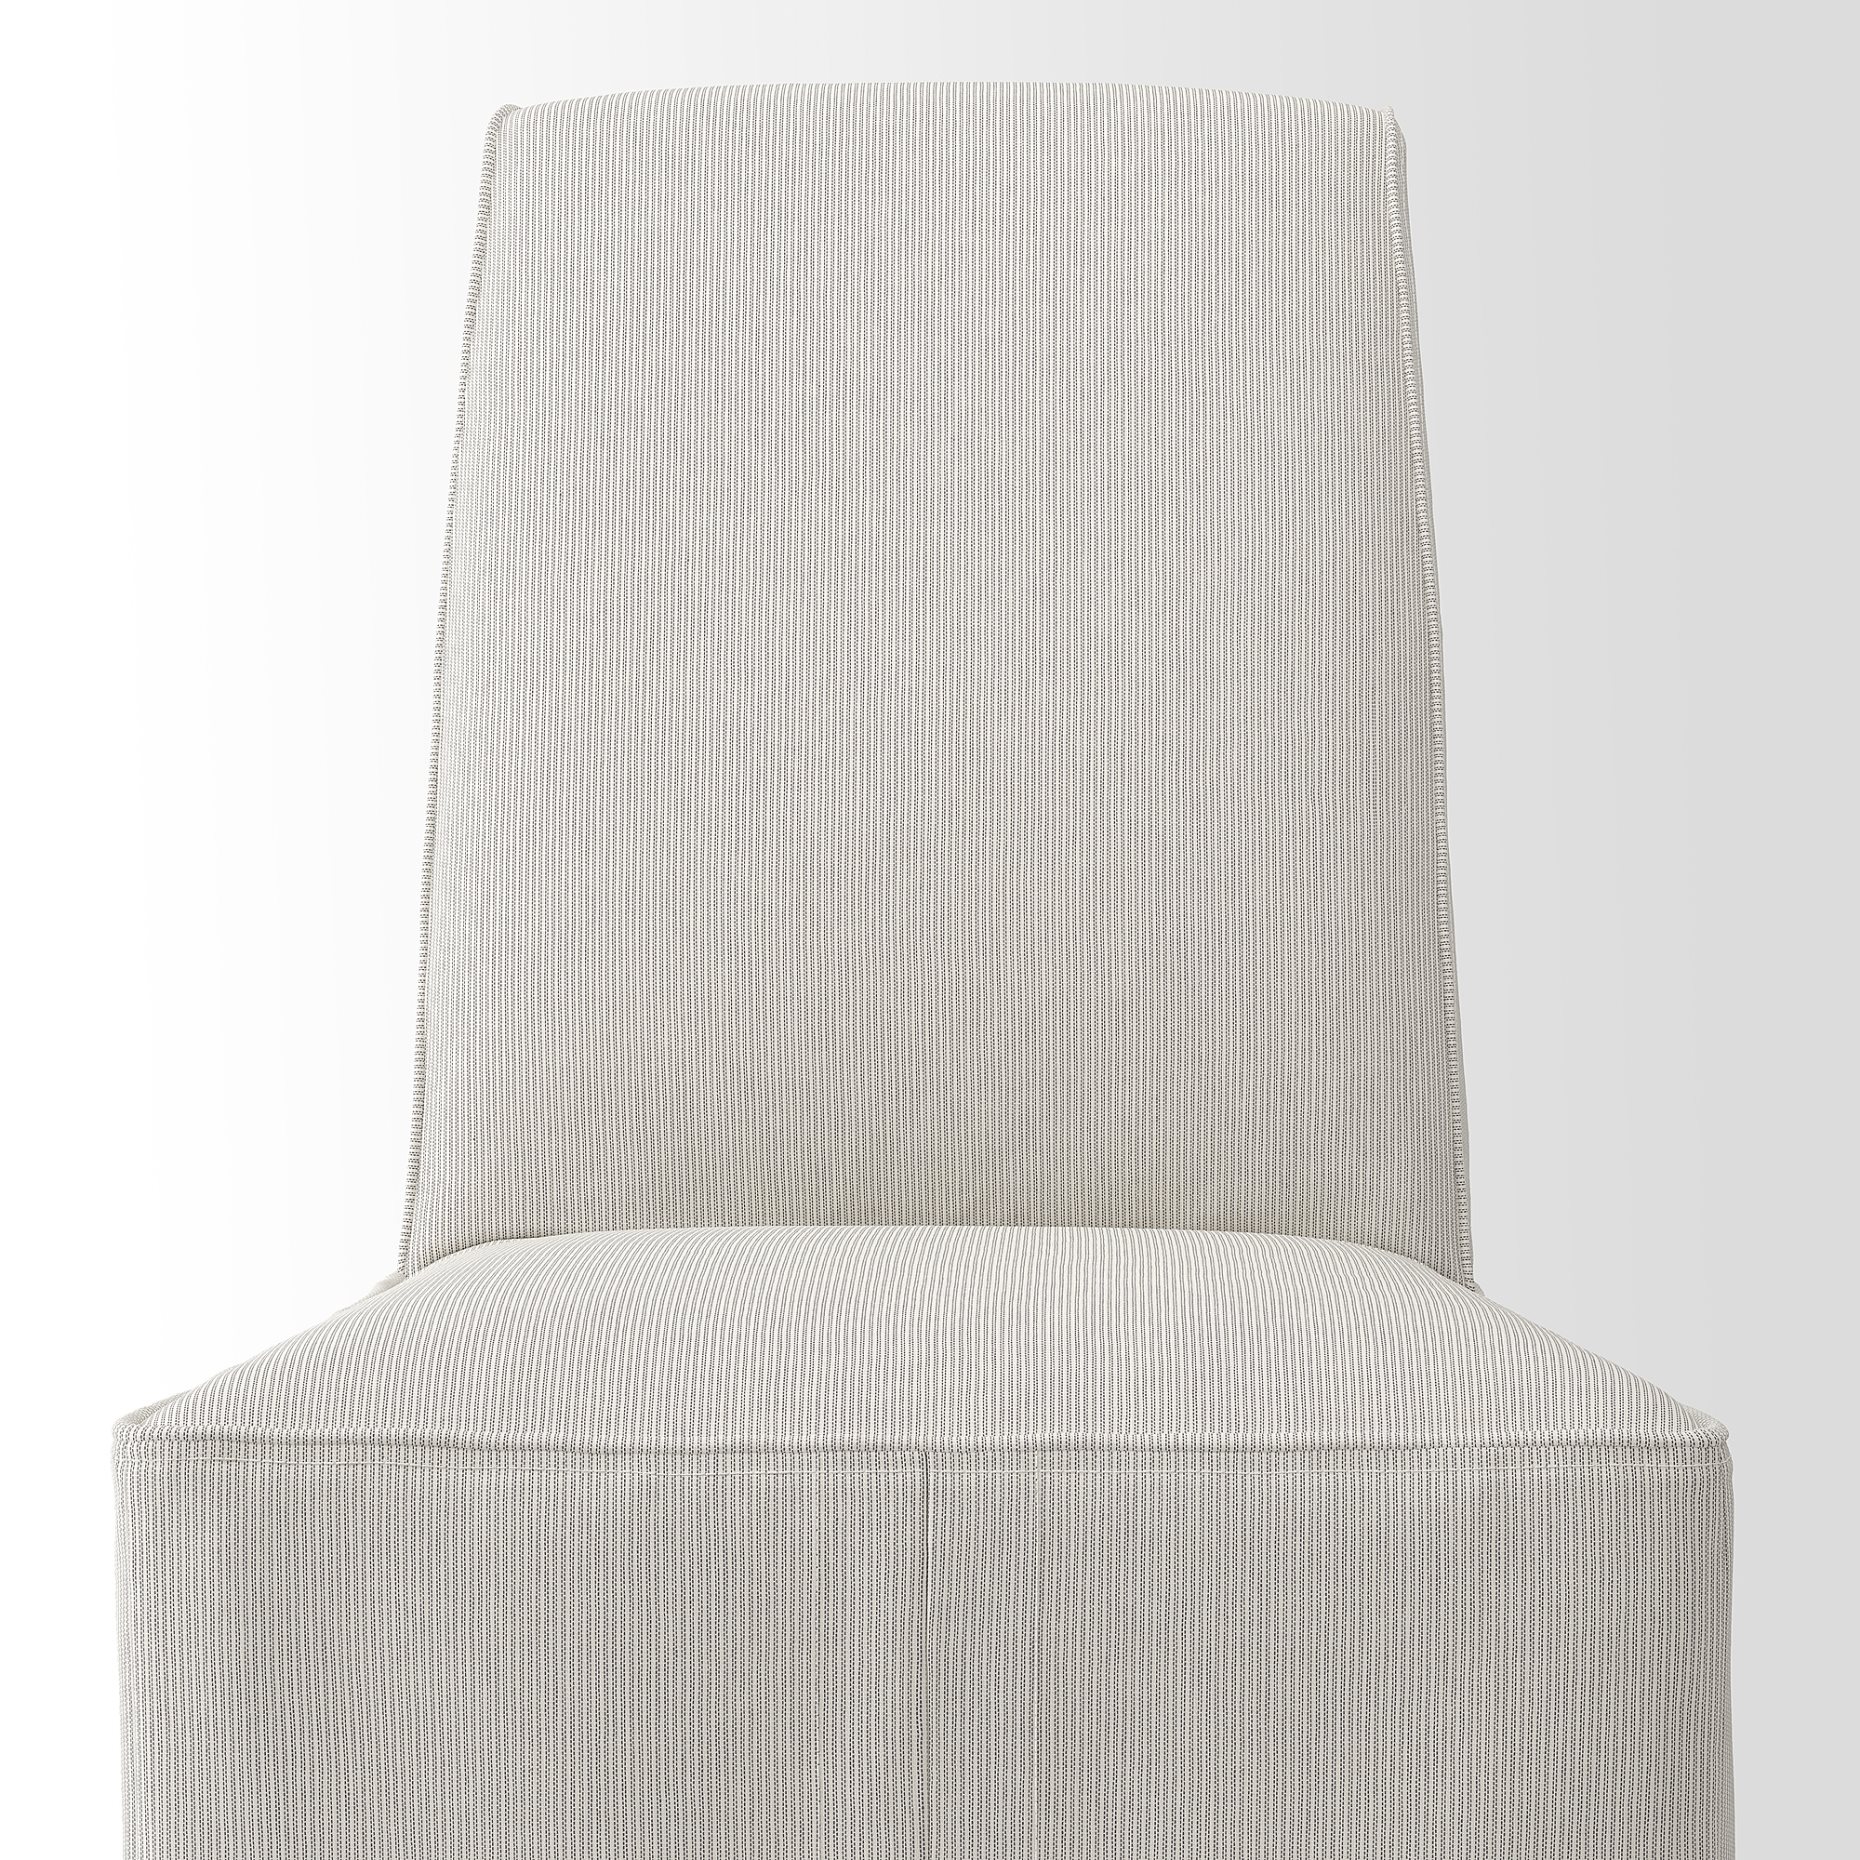 BERGMUND, chair with long cover, 093.846.02